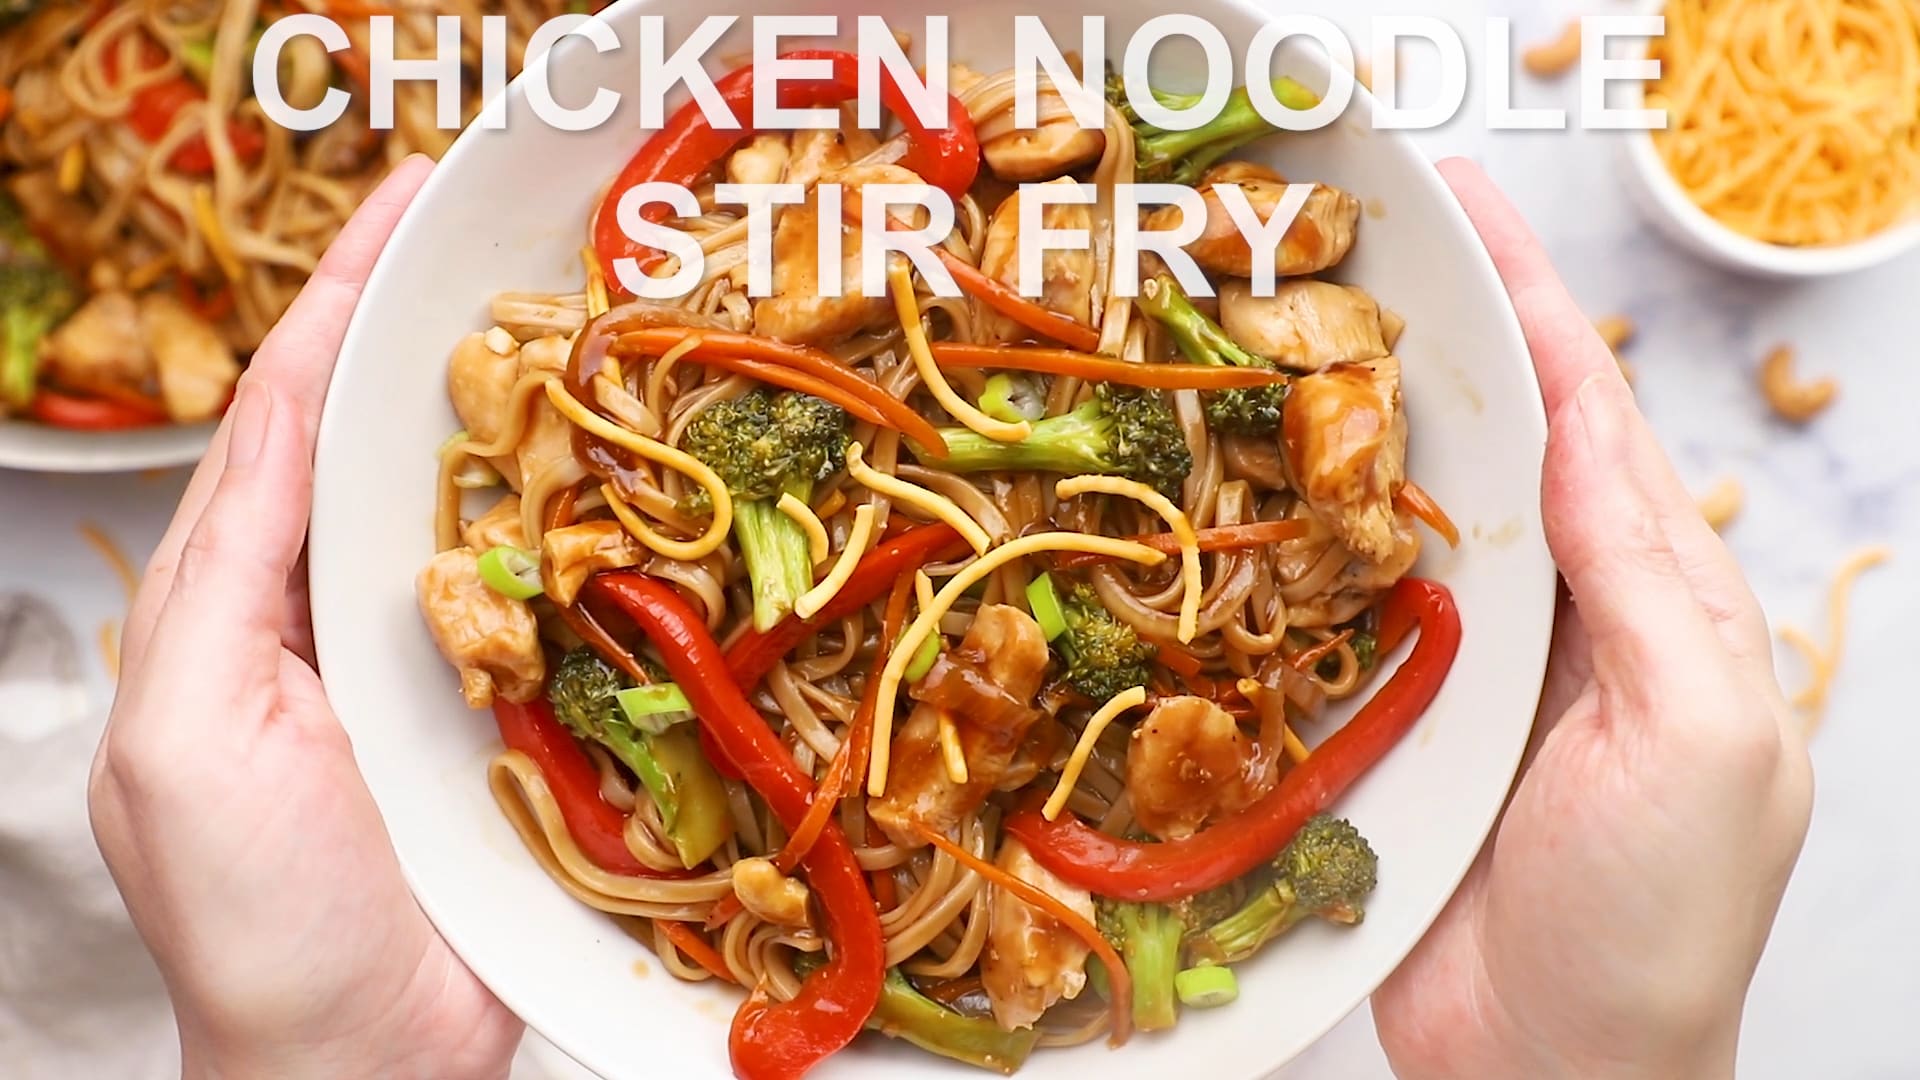 Make This Spicy Chicken Noodle Stir Fry  Savory Bites Recipes - A Food  Blog with Quick and Easy Recipes